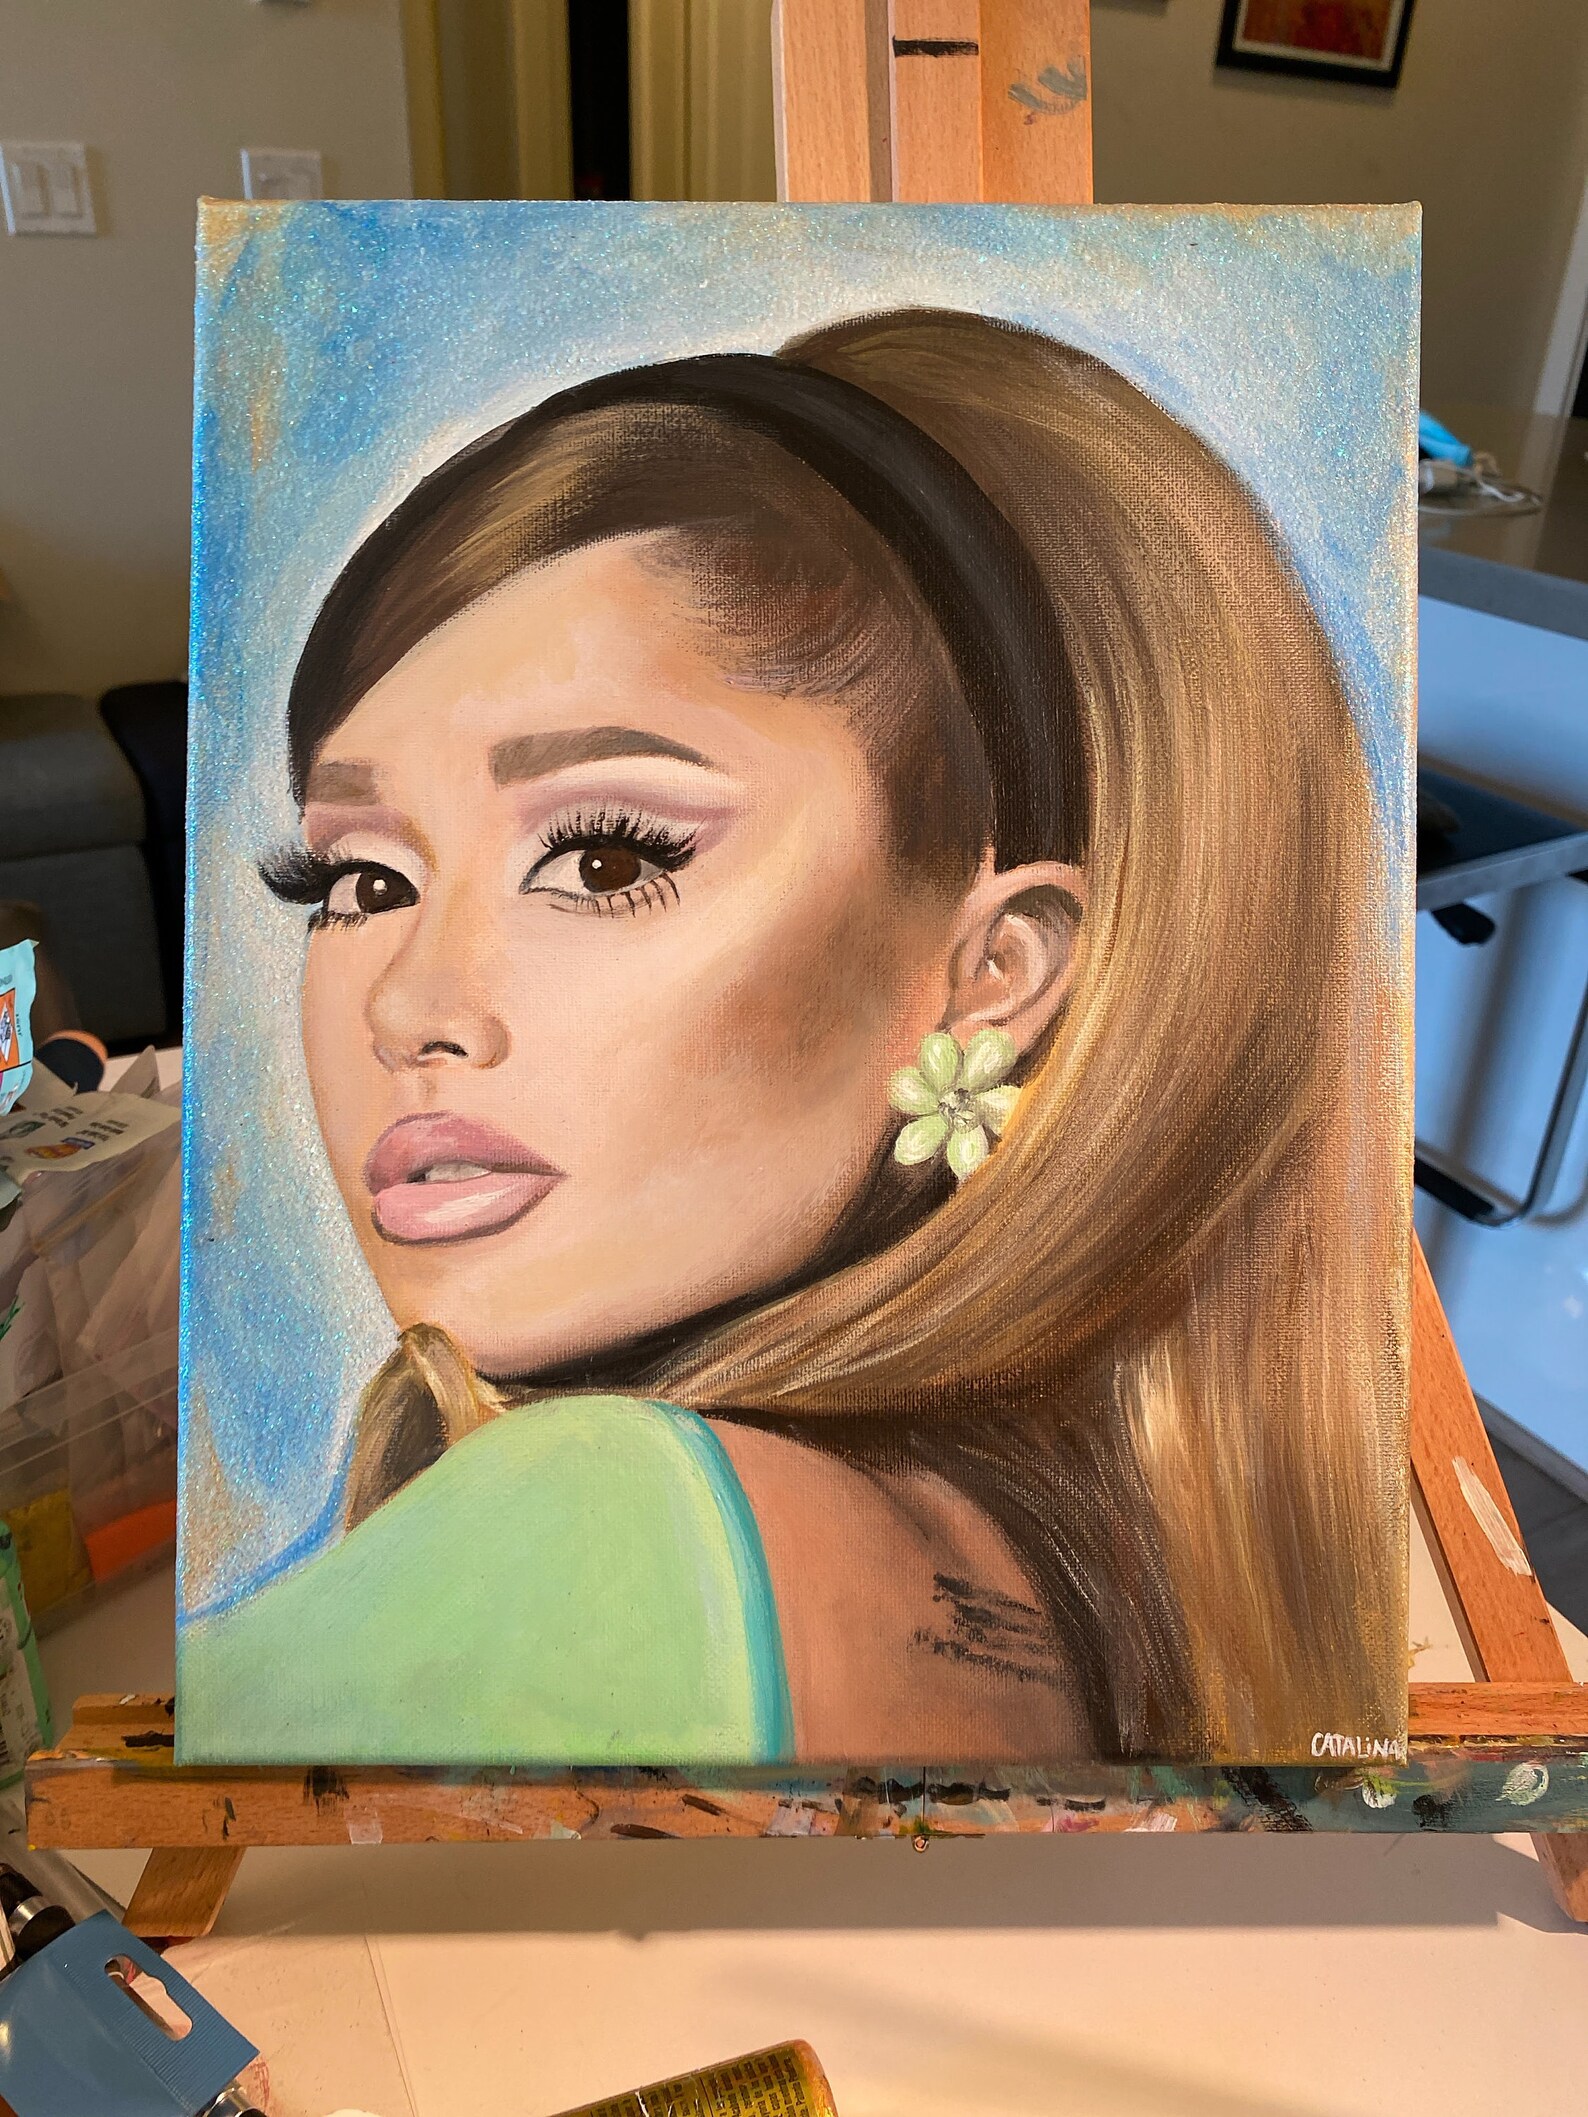 Ariana Grande POSITIONS Original 14x11 in Acrylic Painting on - Etsy Israel